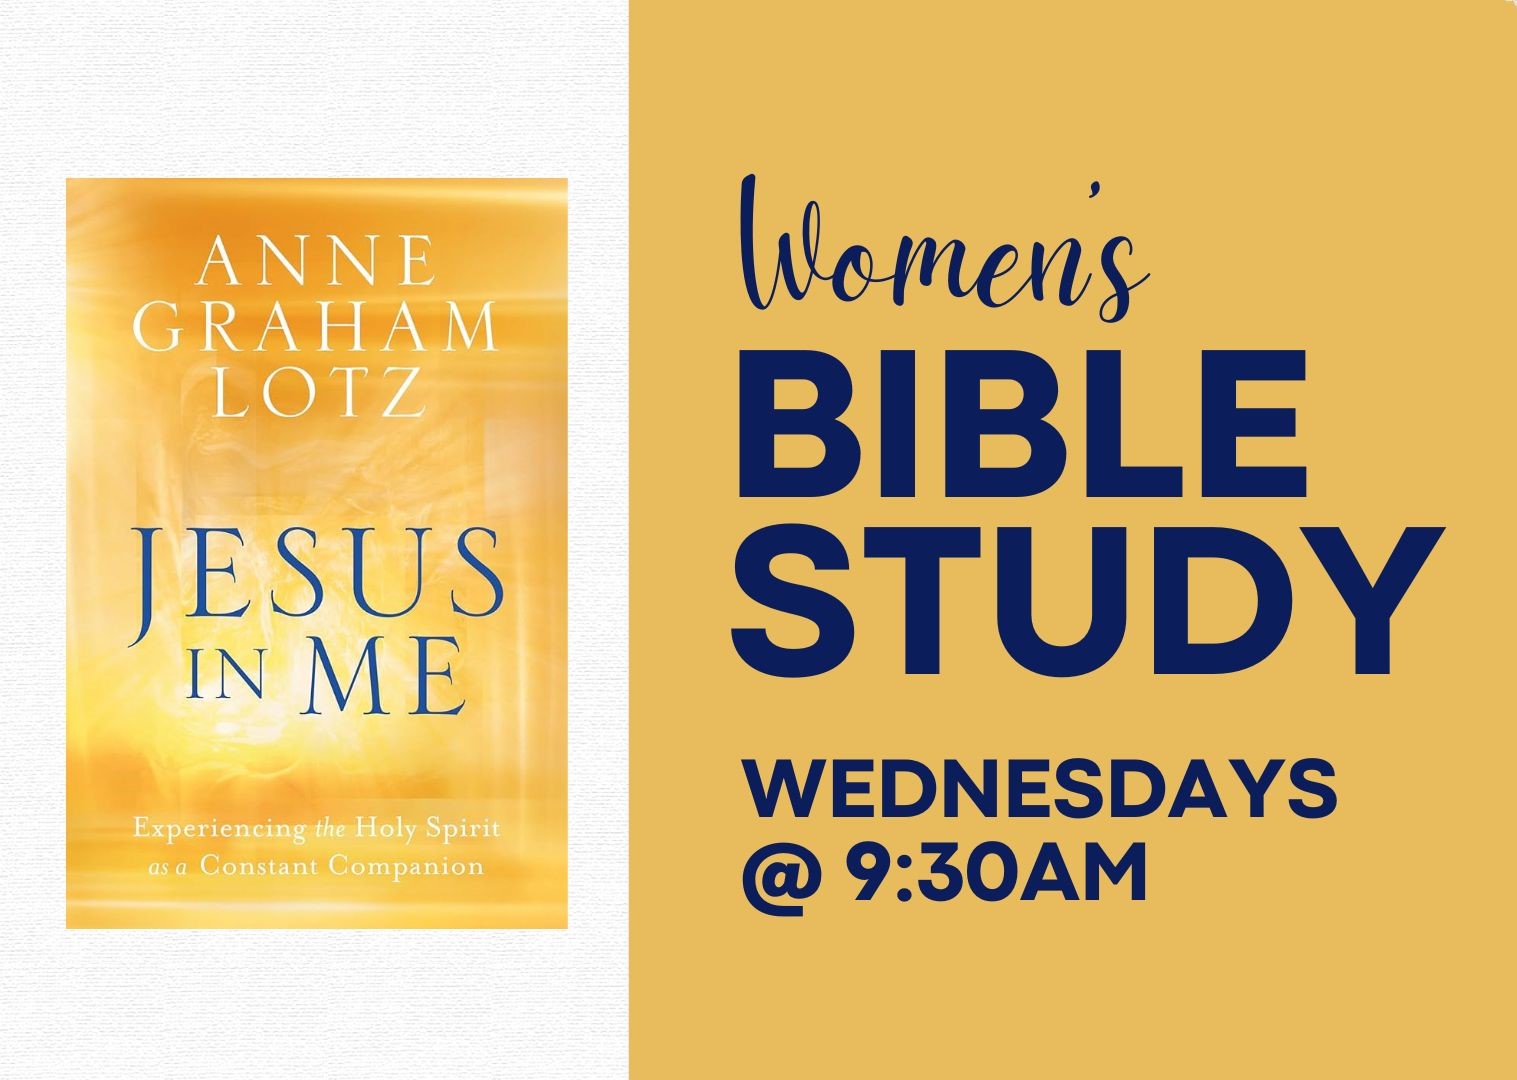 womensbiblestudy_events